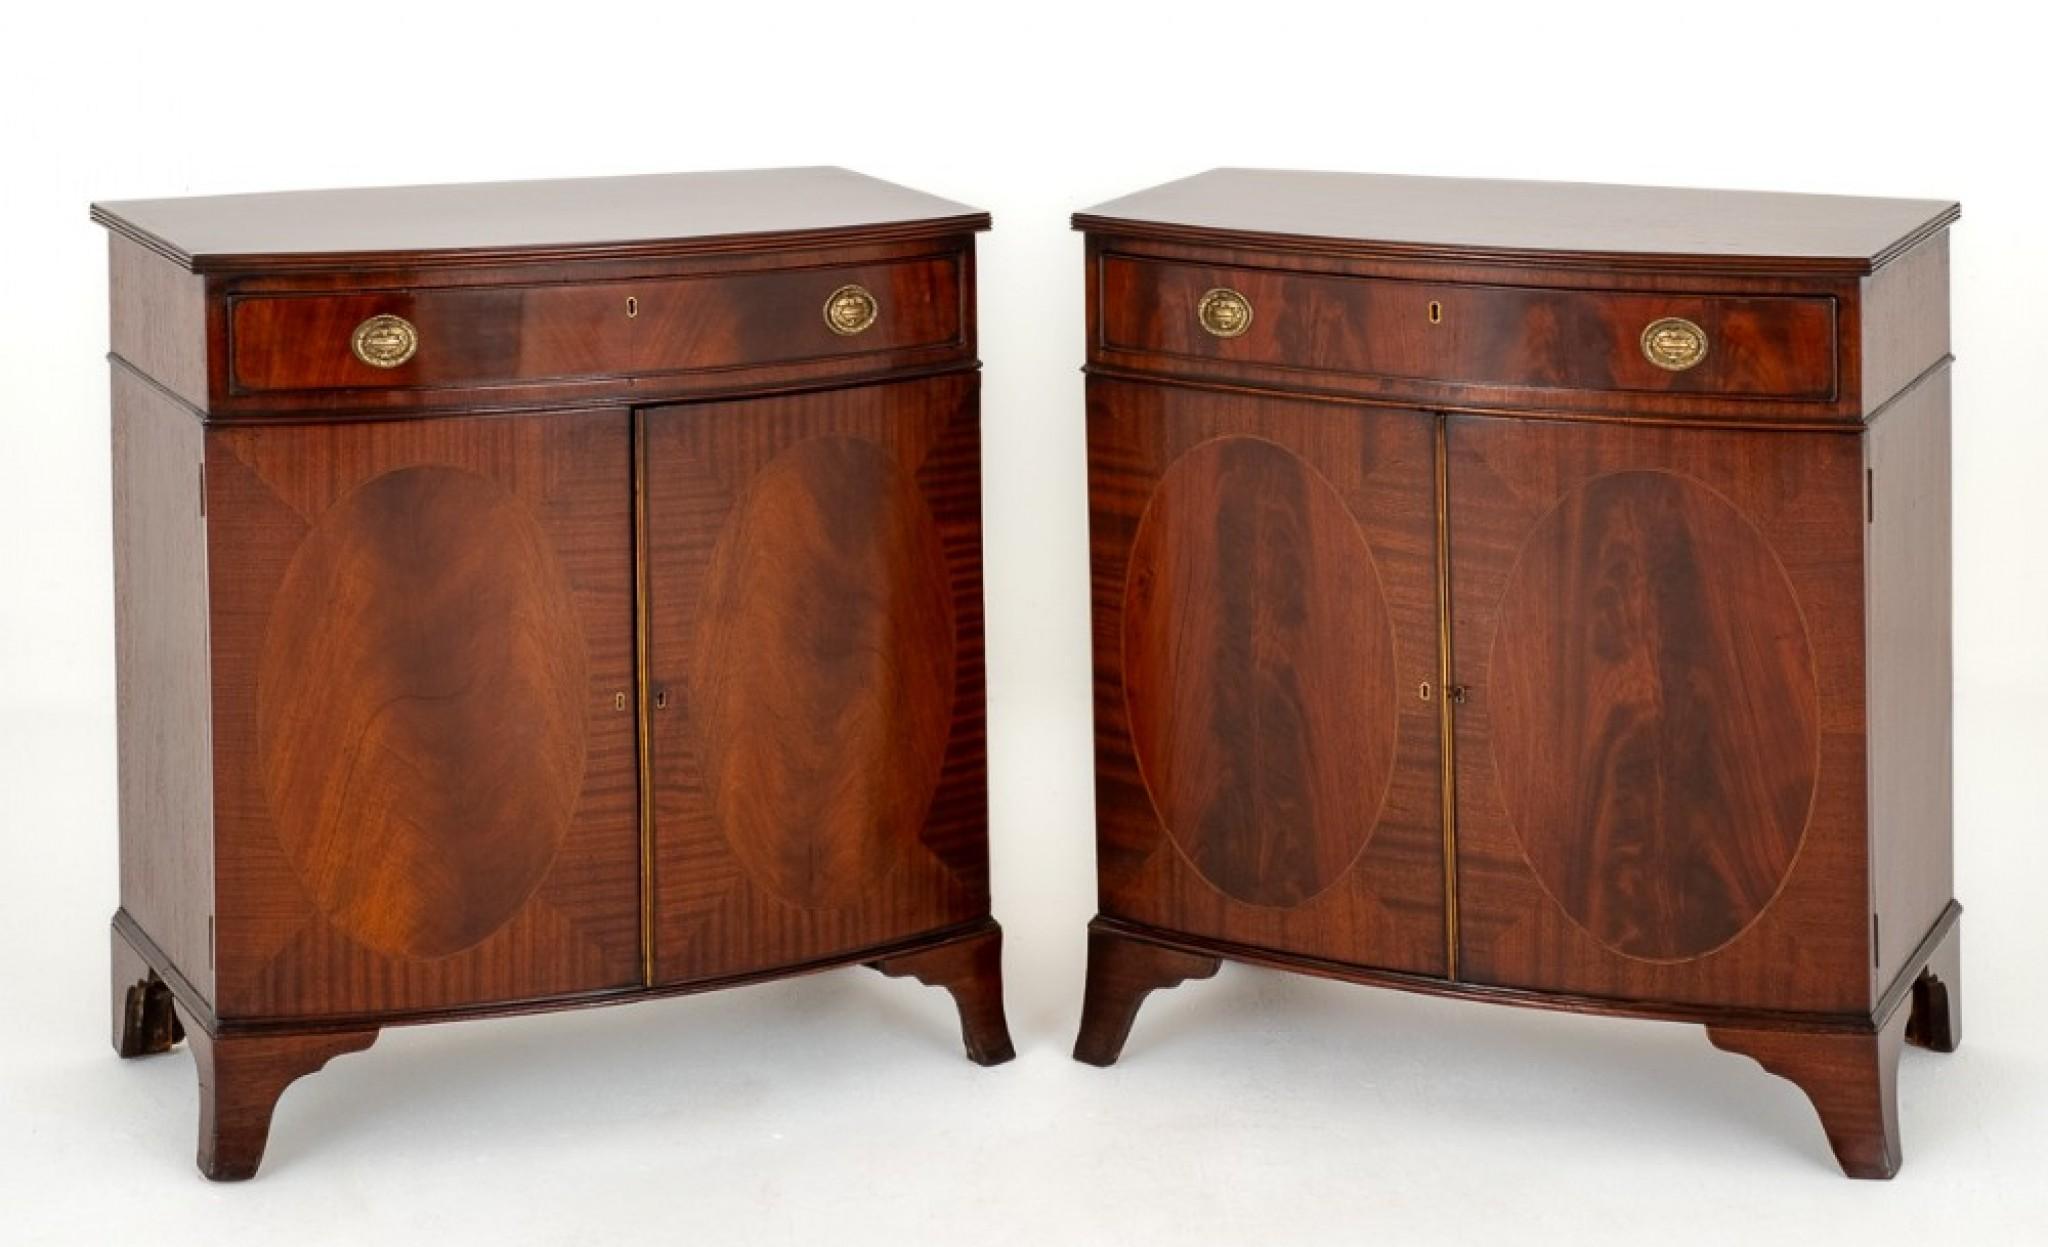 Pair of Mahogany Sheraton Revival Bow Fronted Cabinets.
These Cabinets Stand upon Splay Feet.
Circa 1920
Each Cabinet Having 2 Doors with Oval Panels with Wonderful Flame Mahogany and Ebony and Boxwood Inlaid Lines.
The Oak Lined Drawers Retaining